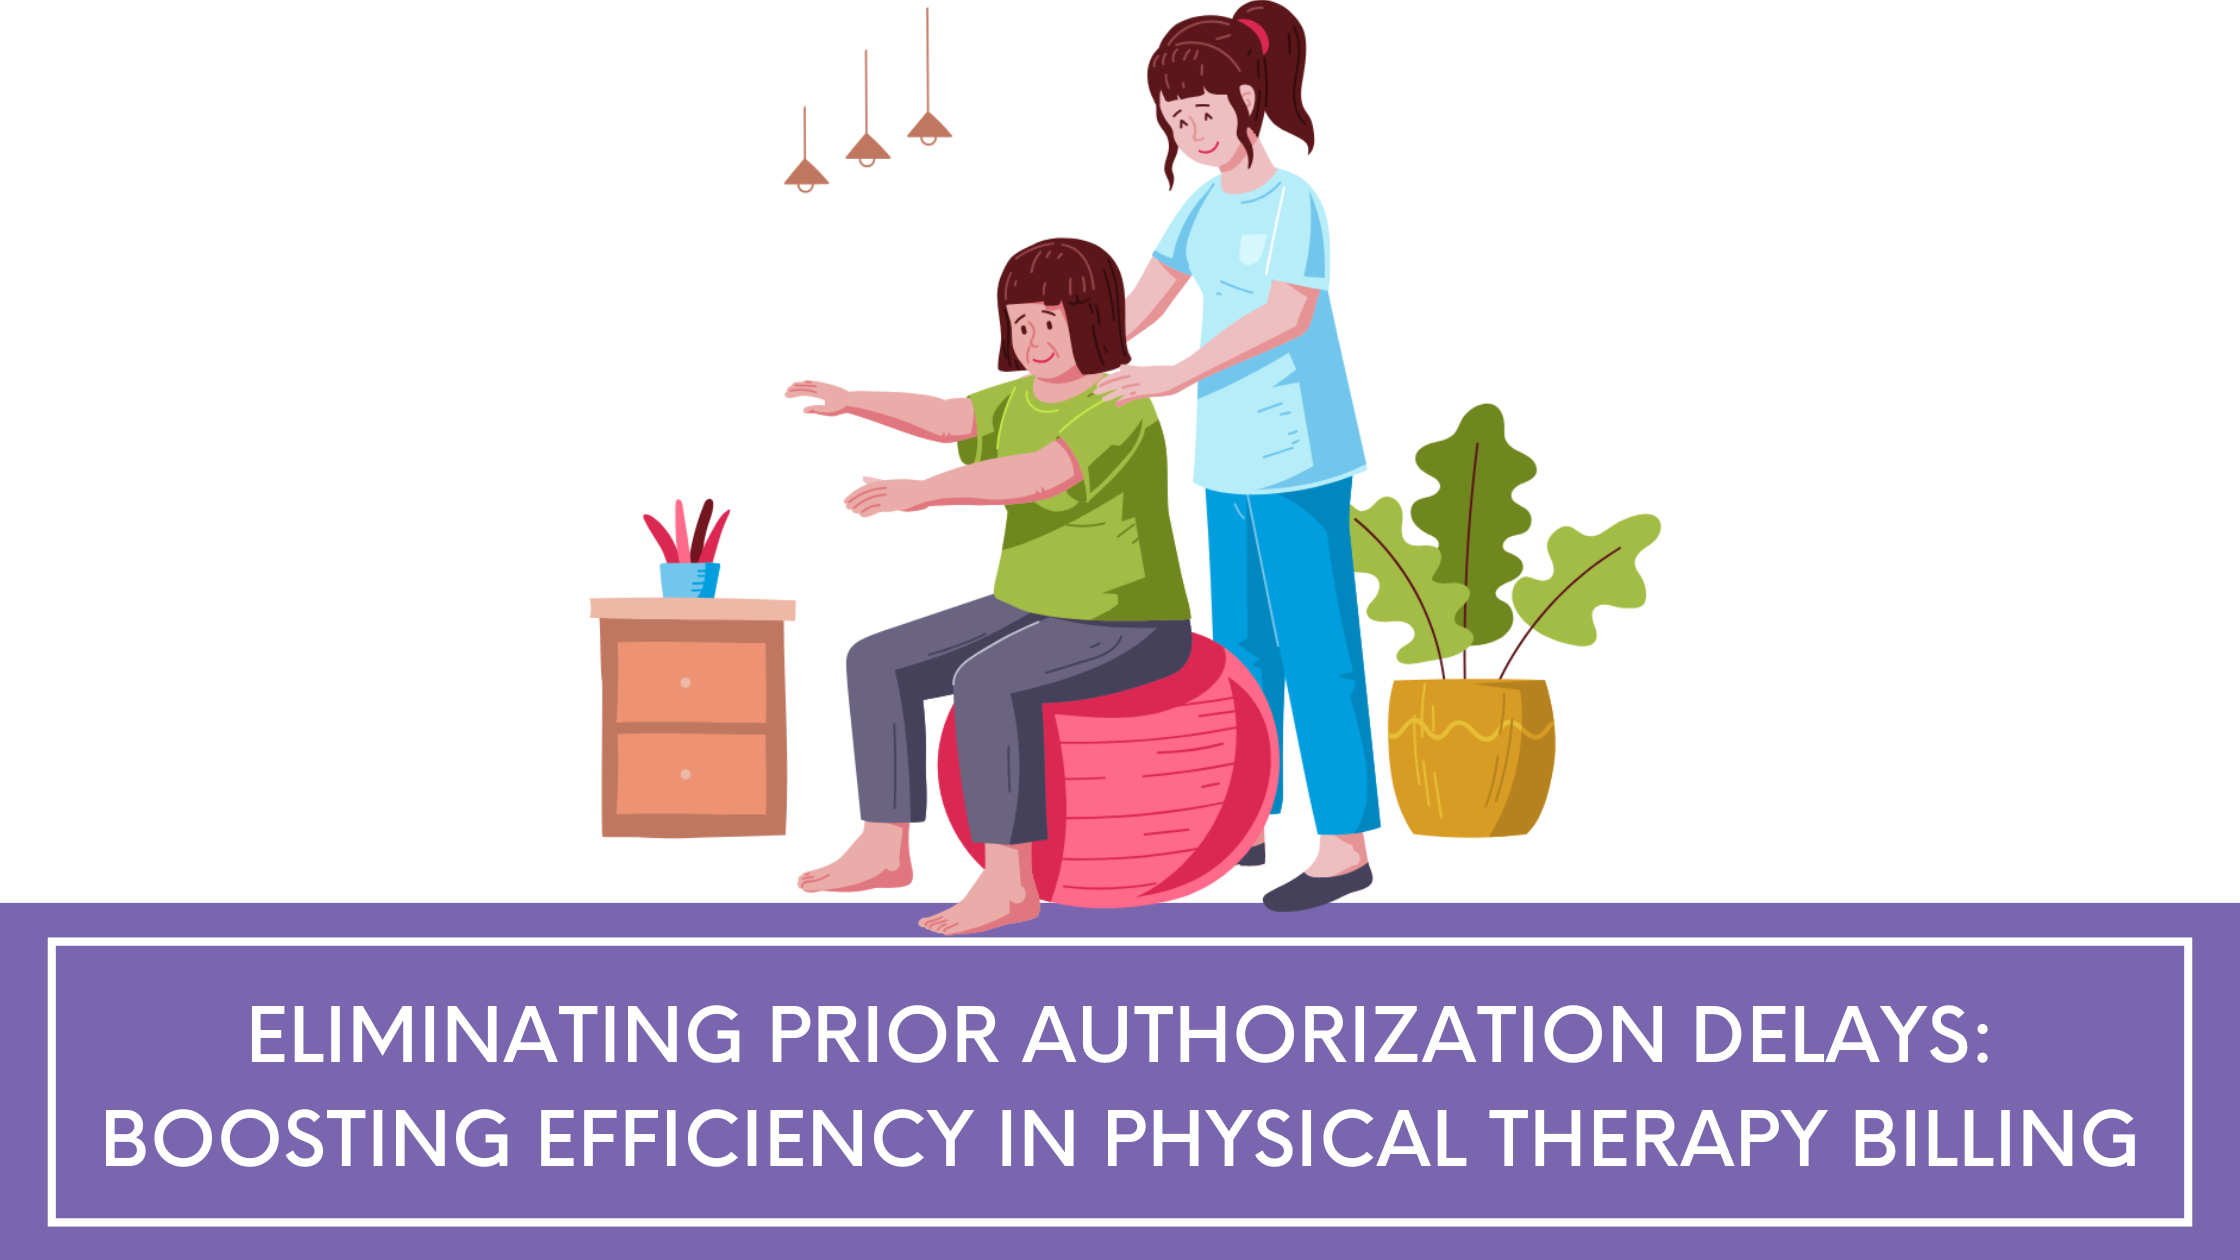 Eliminating Prior Authorization Delays in Physical Therapy Billing